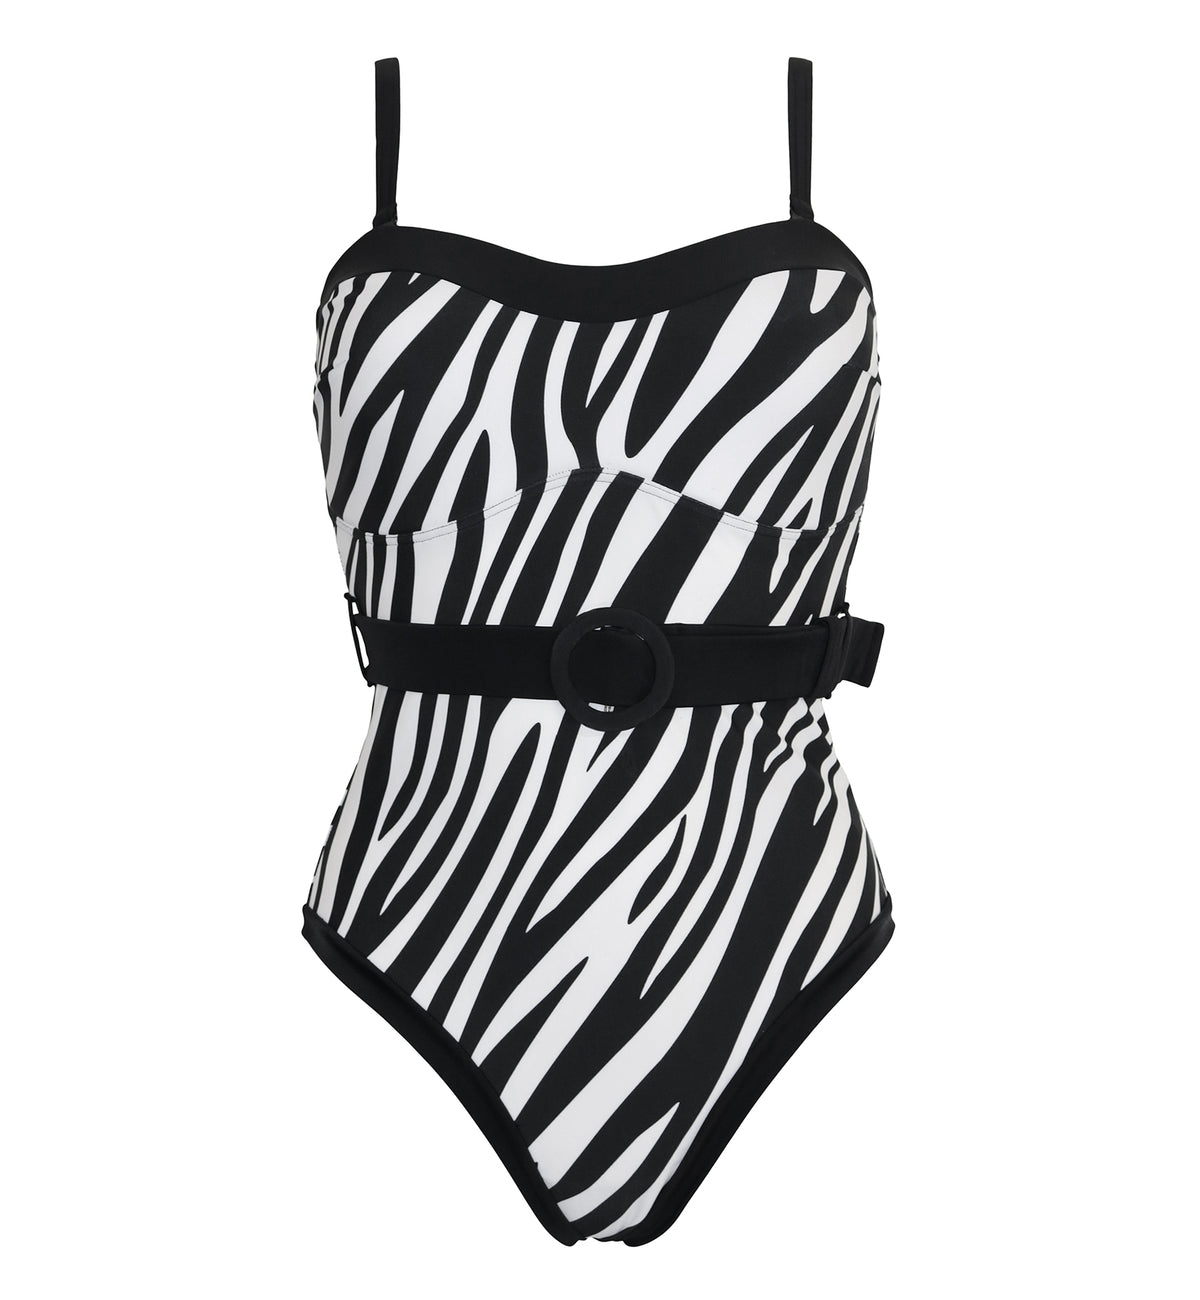 Pour Moi Removable Straps Belted Control Swimsuit (PM1414),Small,Zebra - Zebra,Small